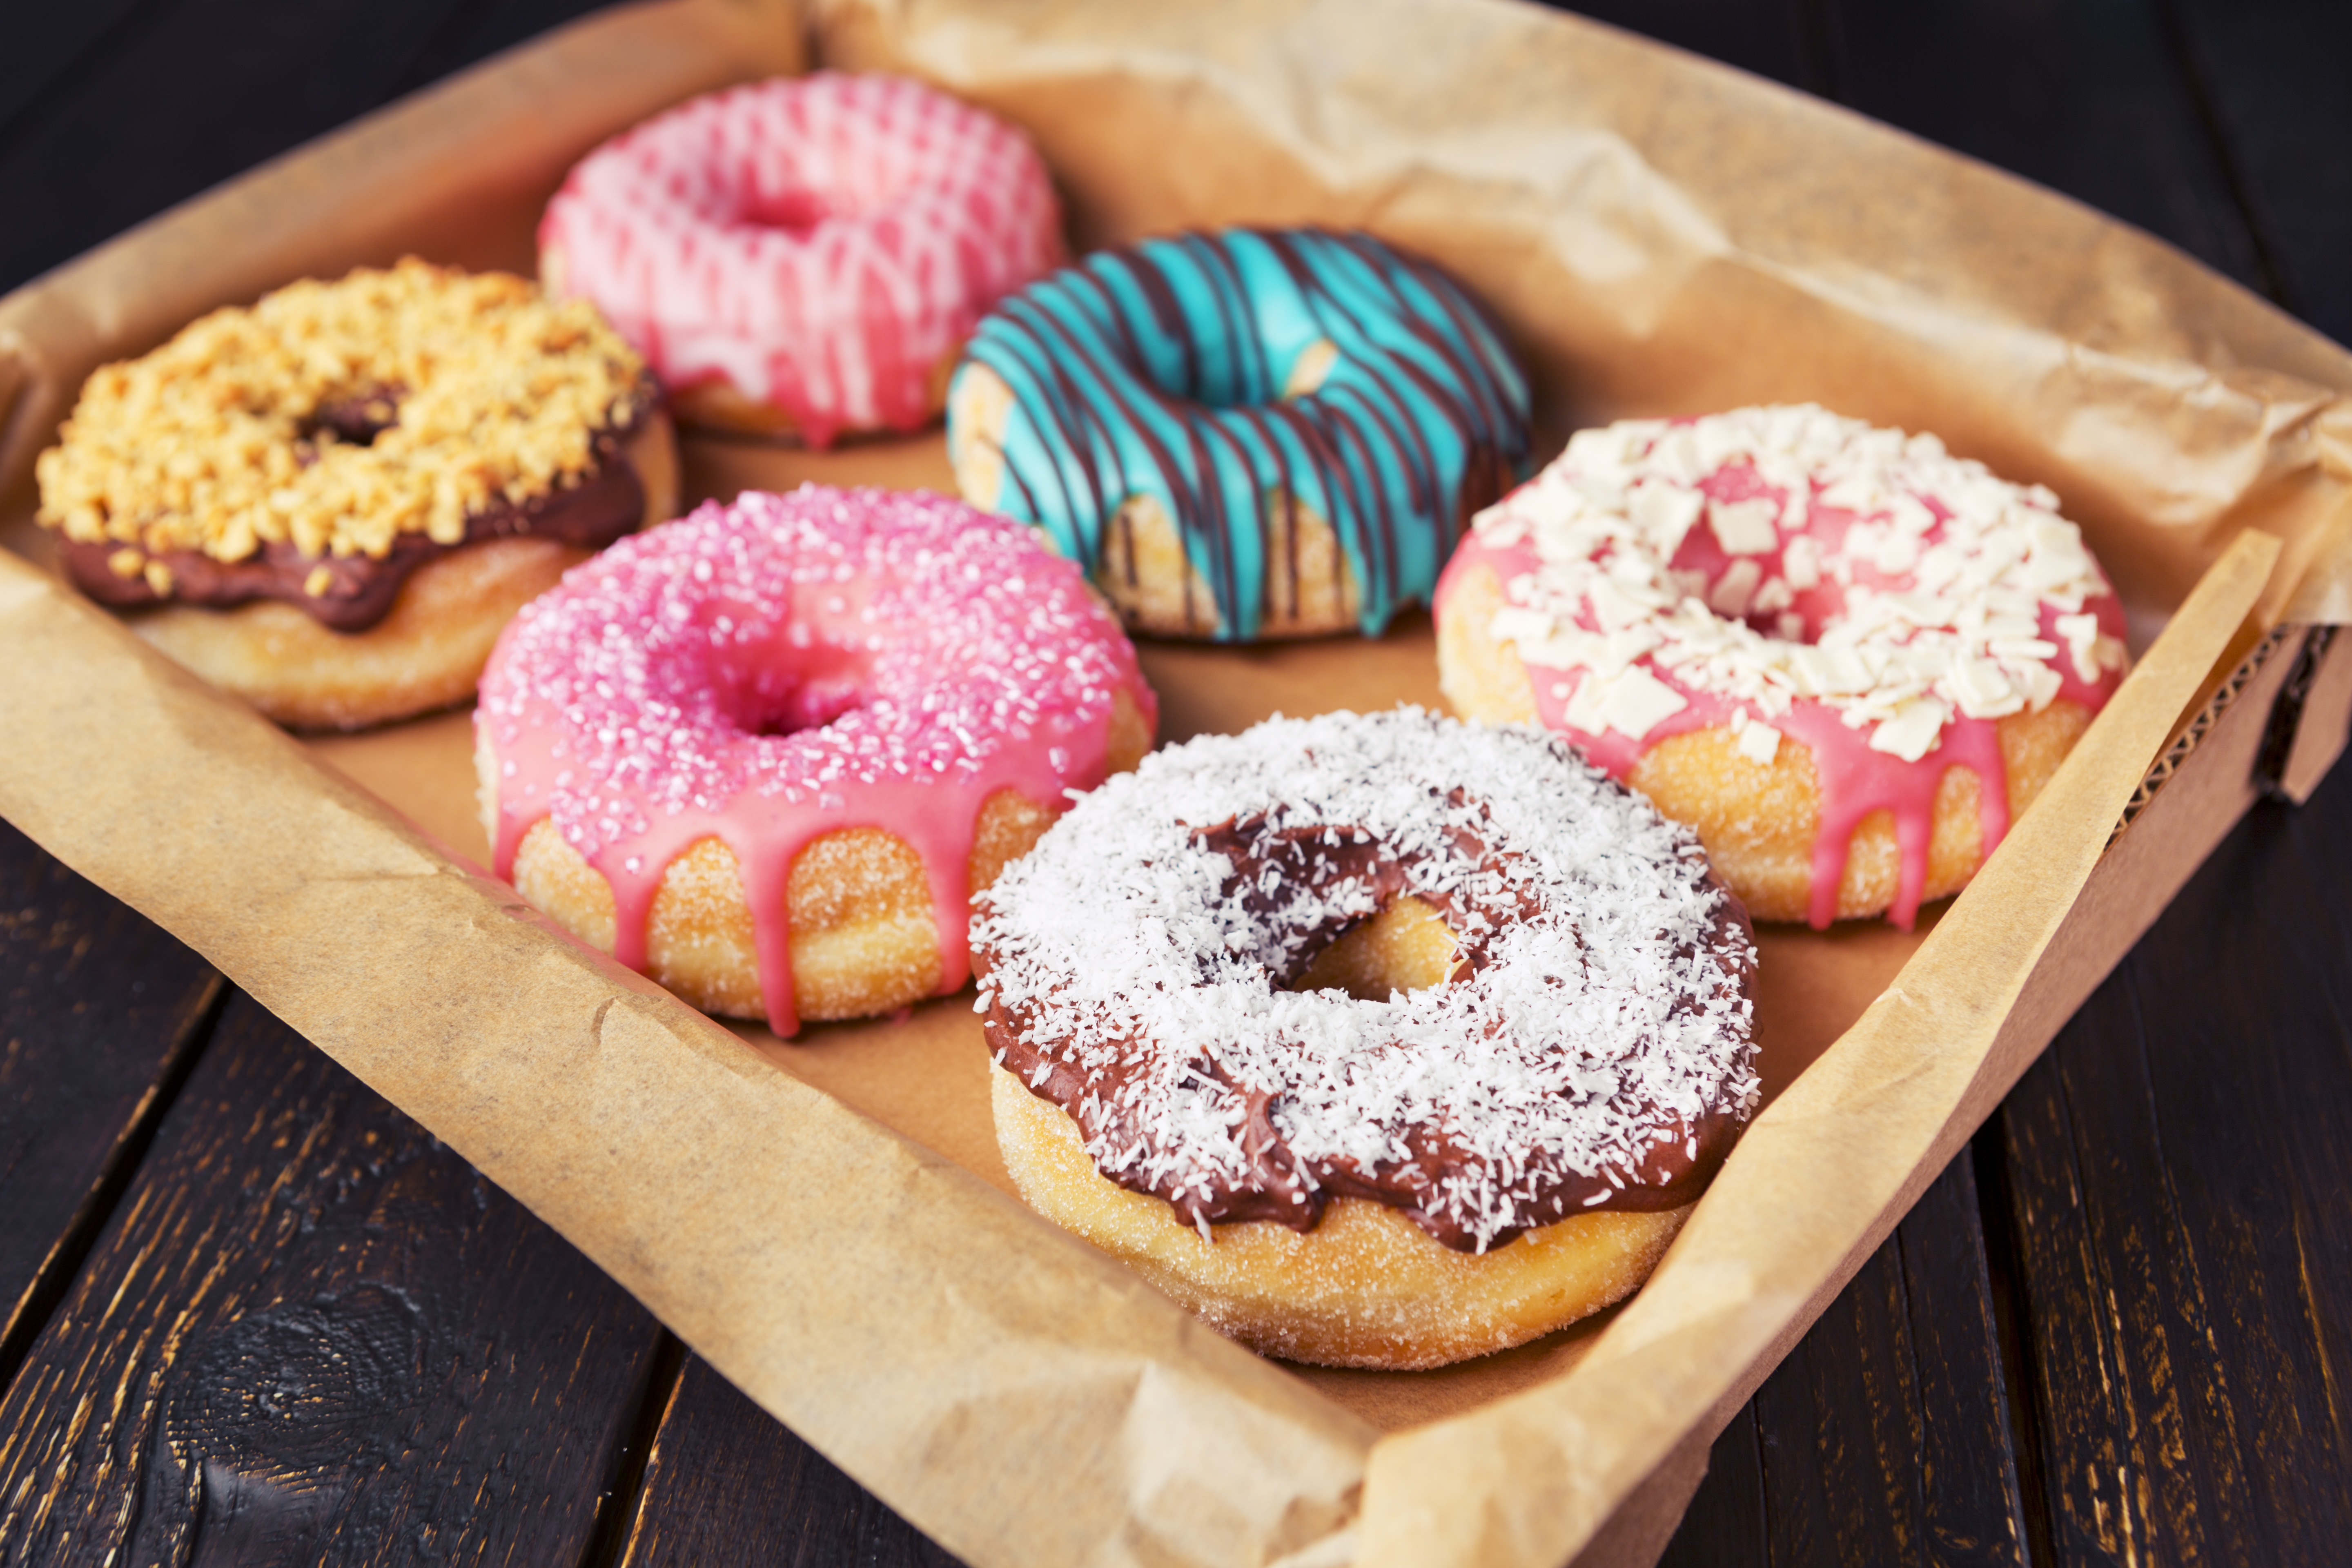 Discover The Best Donuts in Northridge